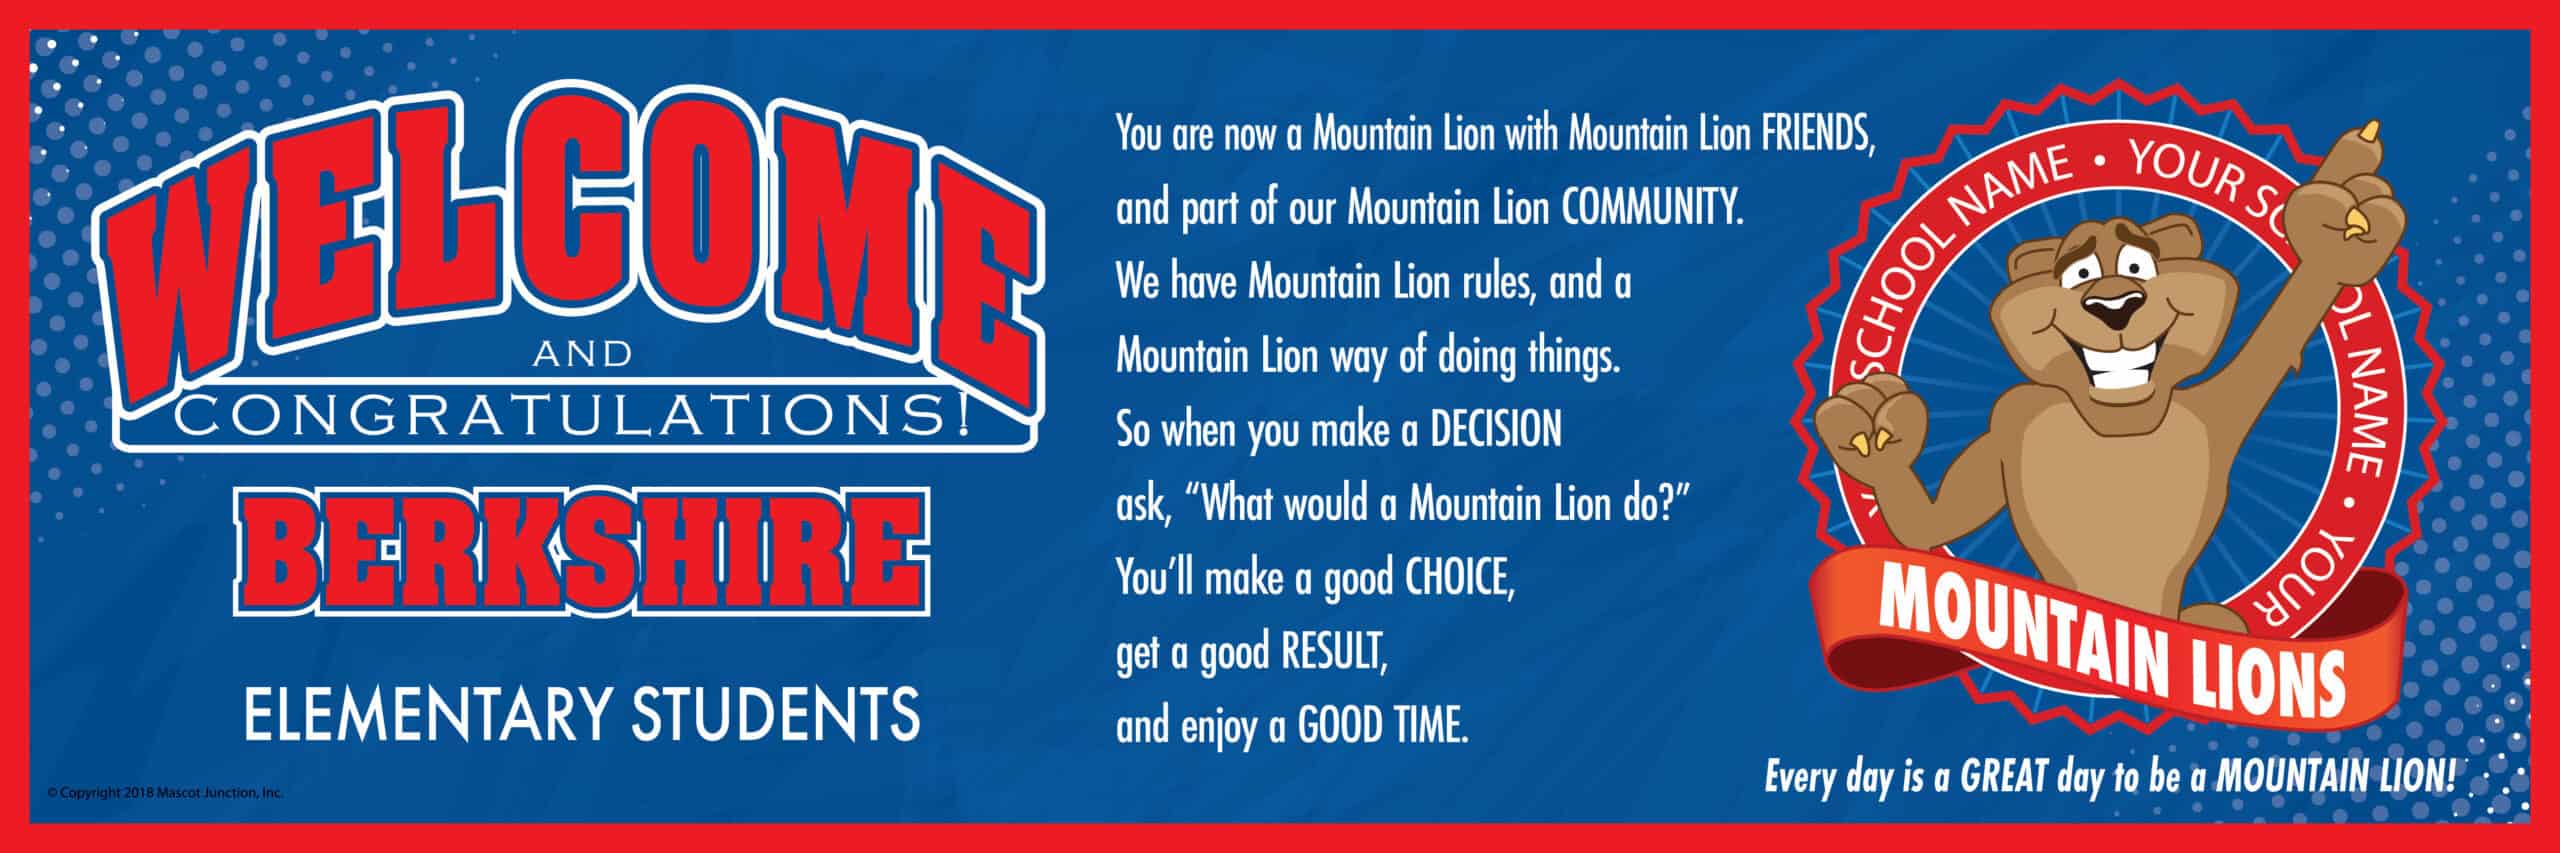 welcome-message-banner-mountian-lion